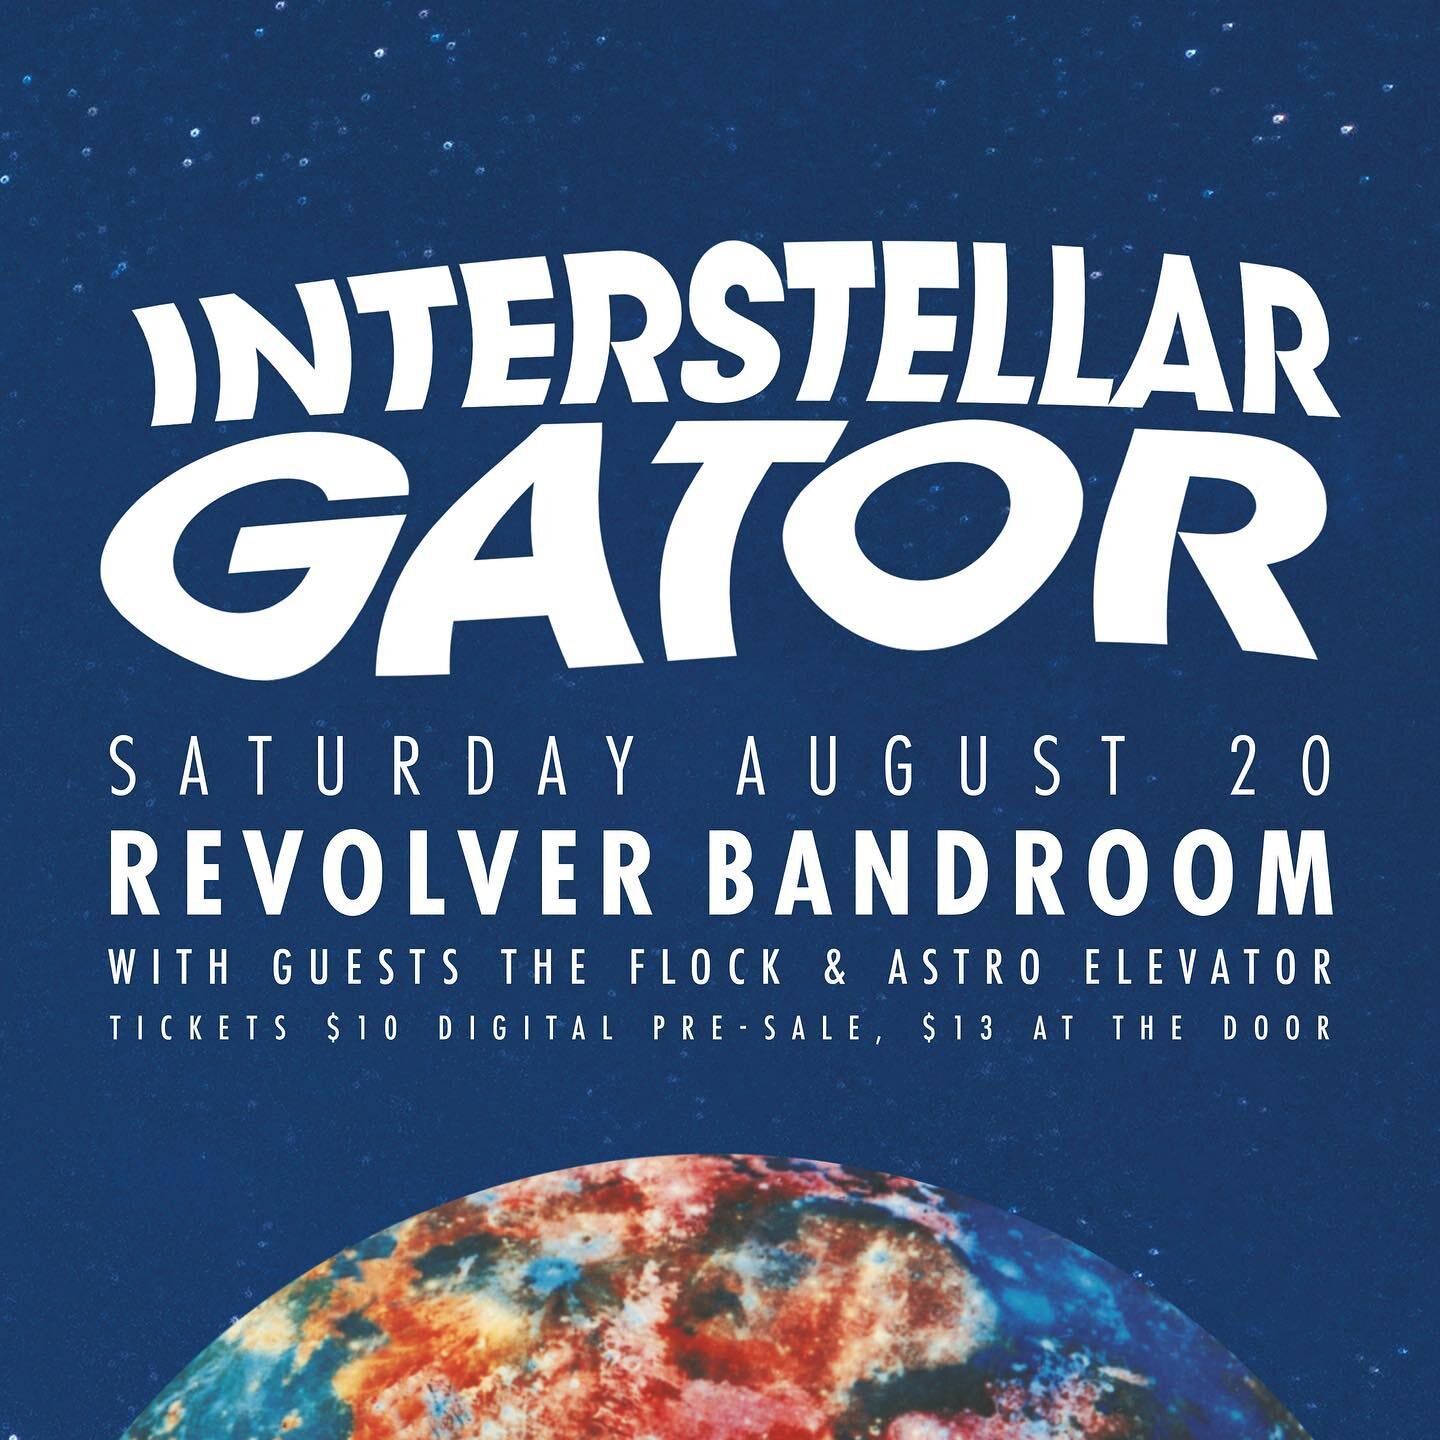 Big week Gator fans. Album dropping on Friday and a launch at Revs this Saturday night with @theflockband and @astro_elevator 

See you there 🐊🐊